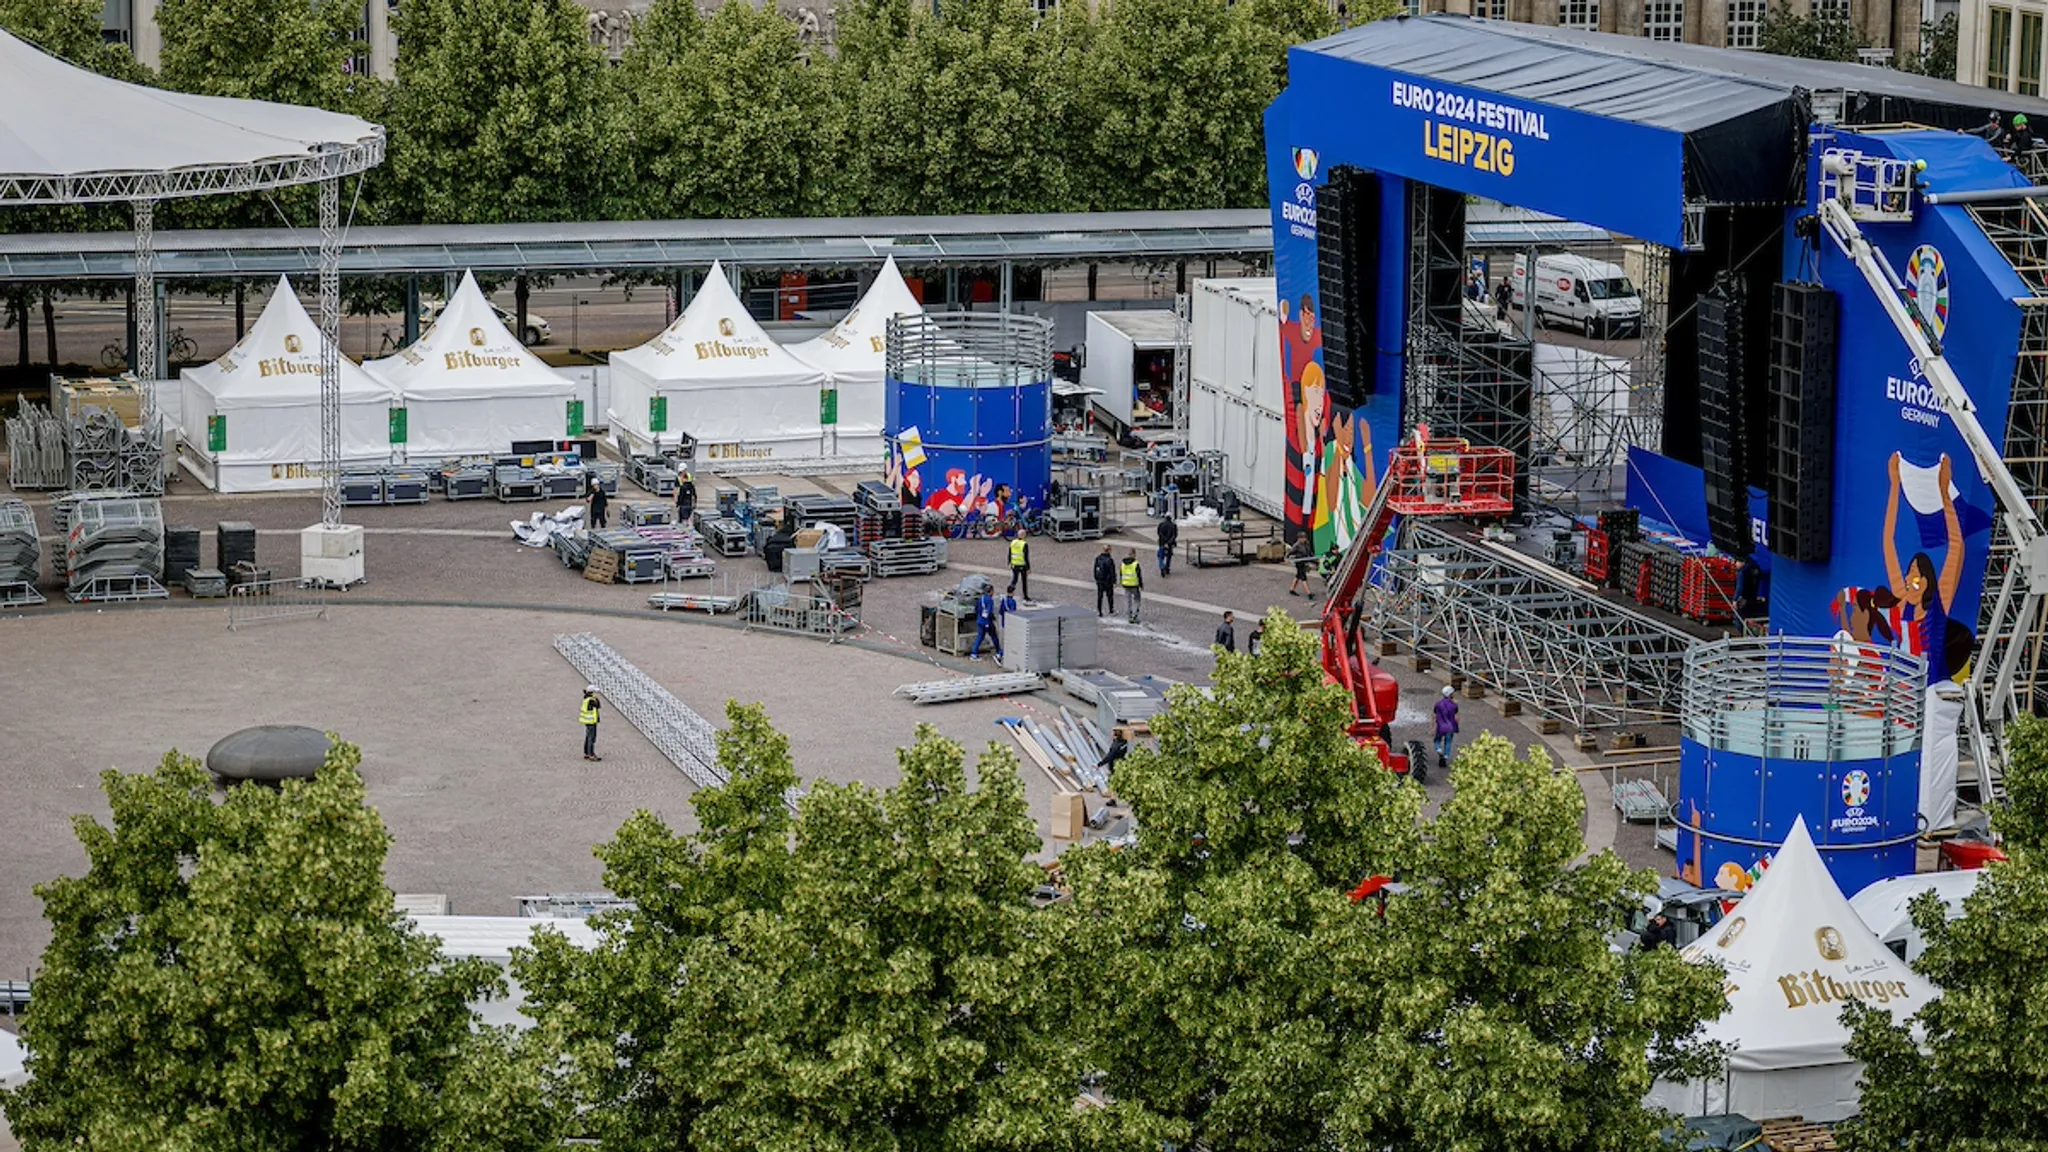 All 51 European Championship matches will be broadcast live on two giant screens at Augustusplatz.